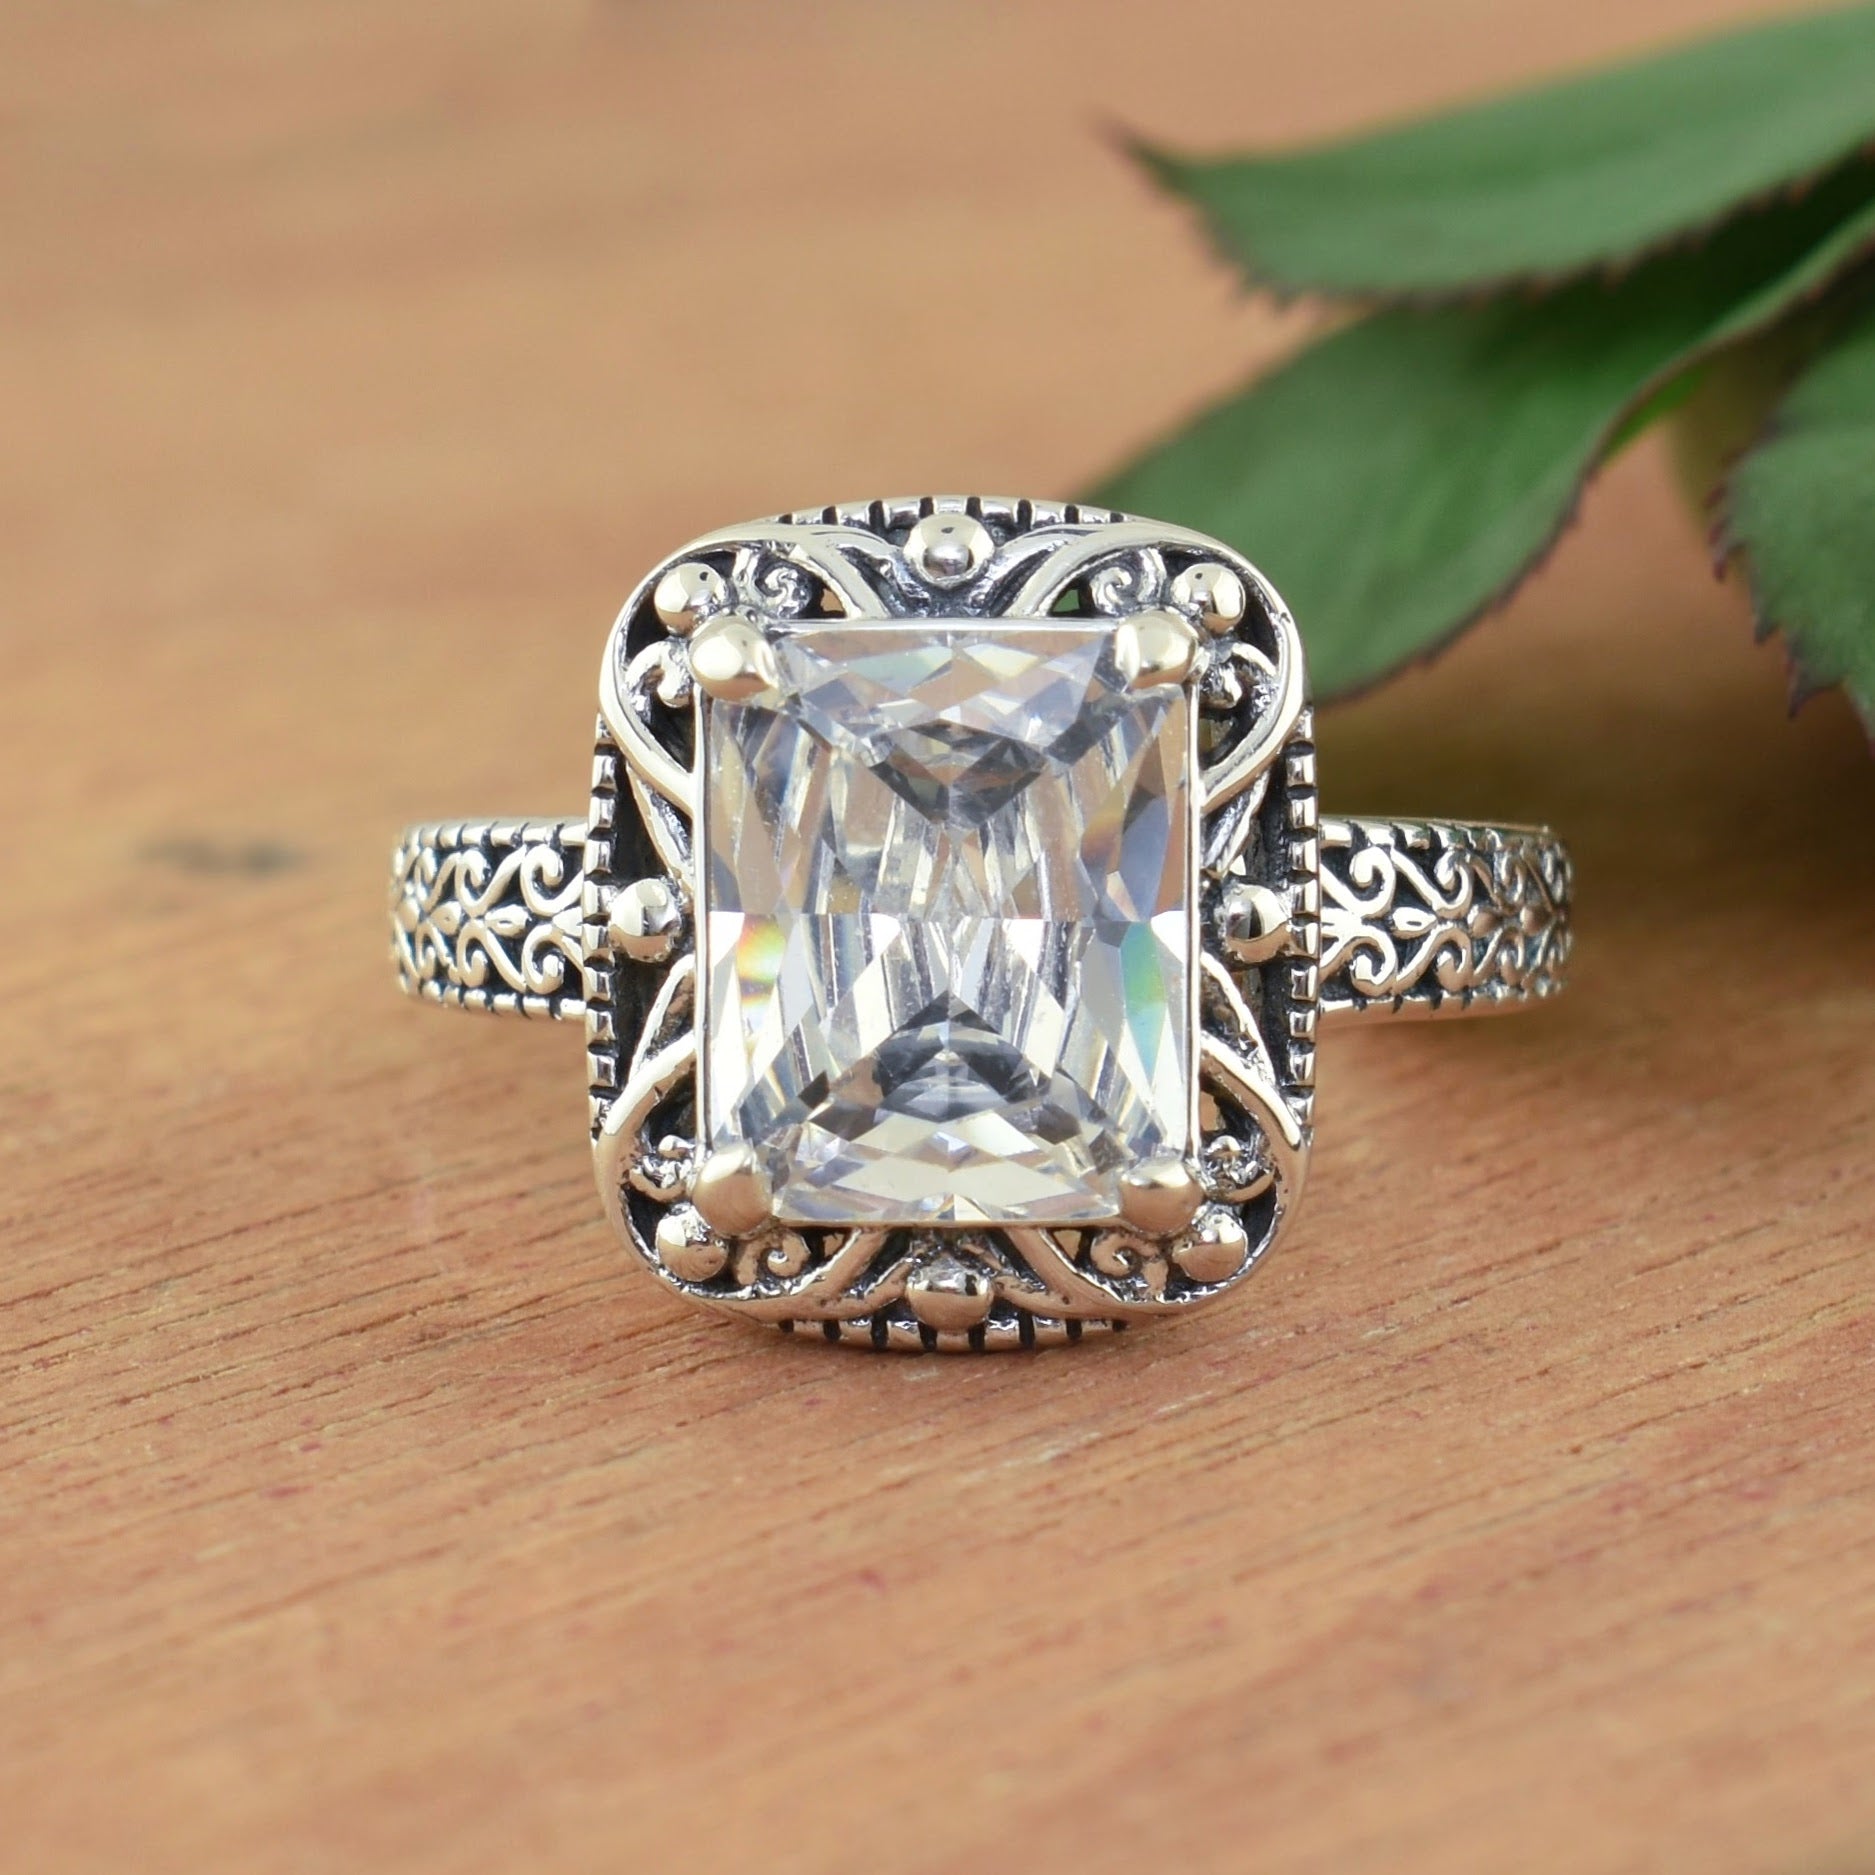 sterling silver ring with radiant cut cz